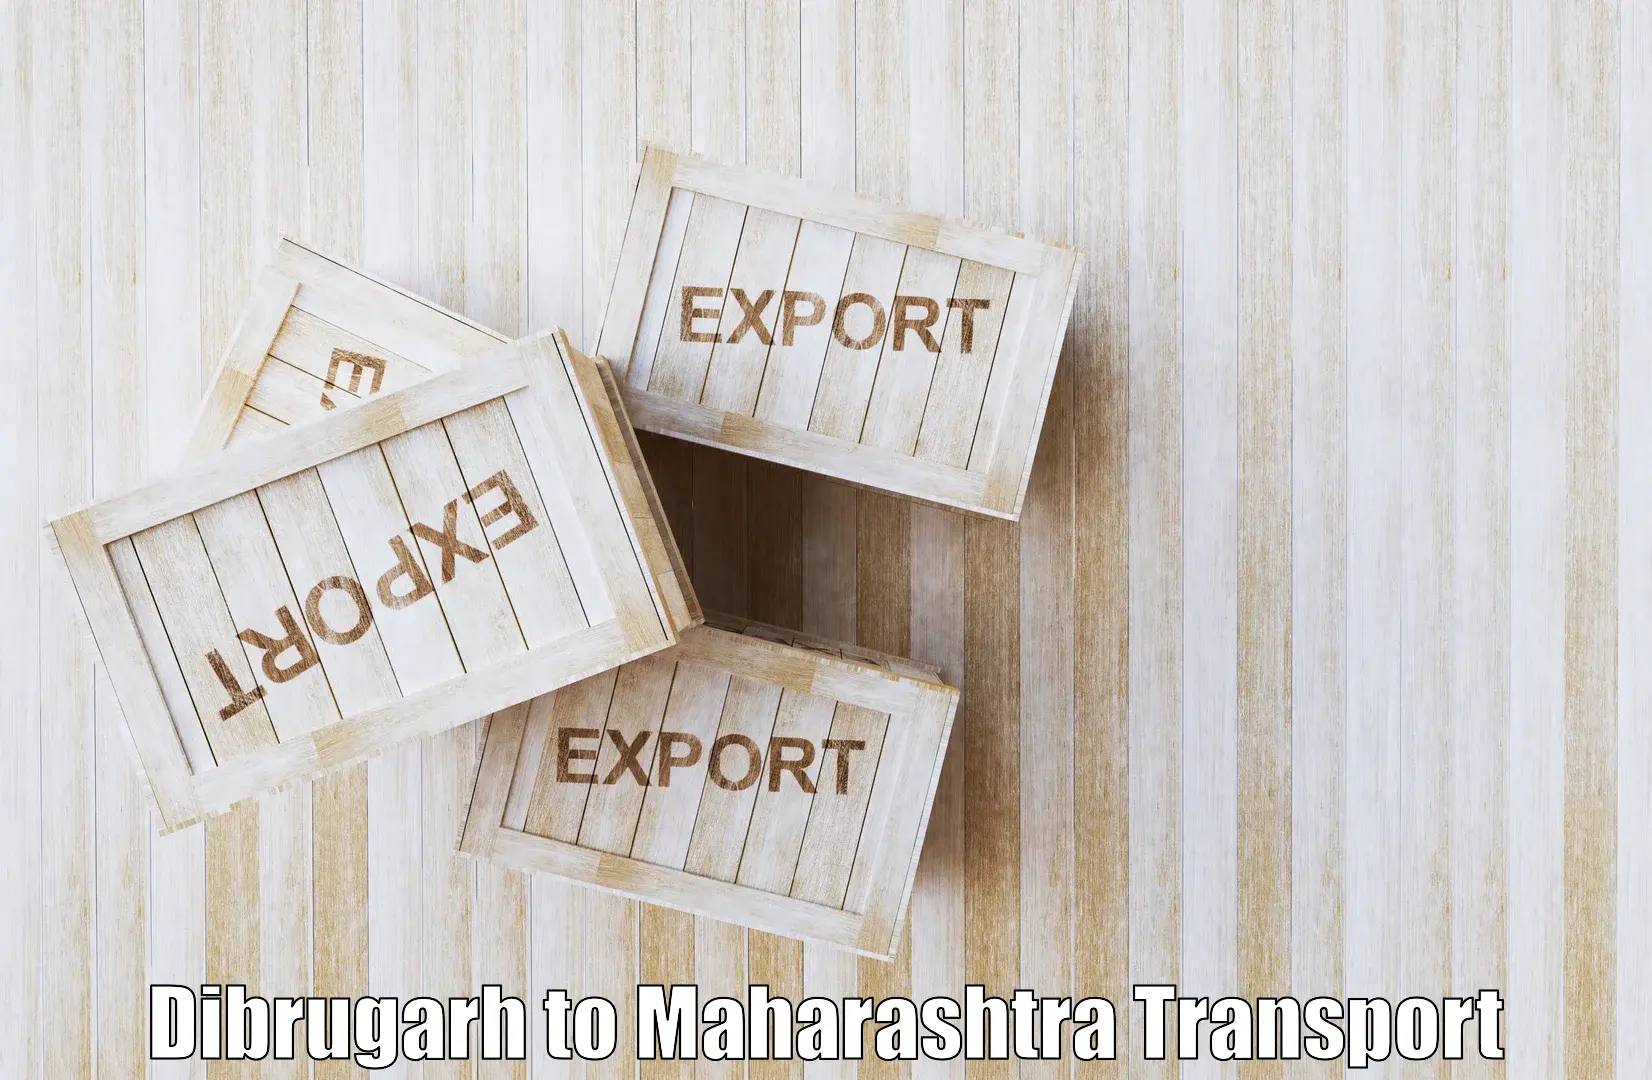 Air freight transport services Dibrugarh to Paratwada